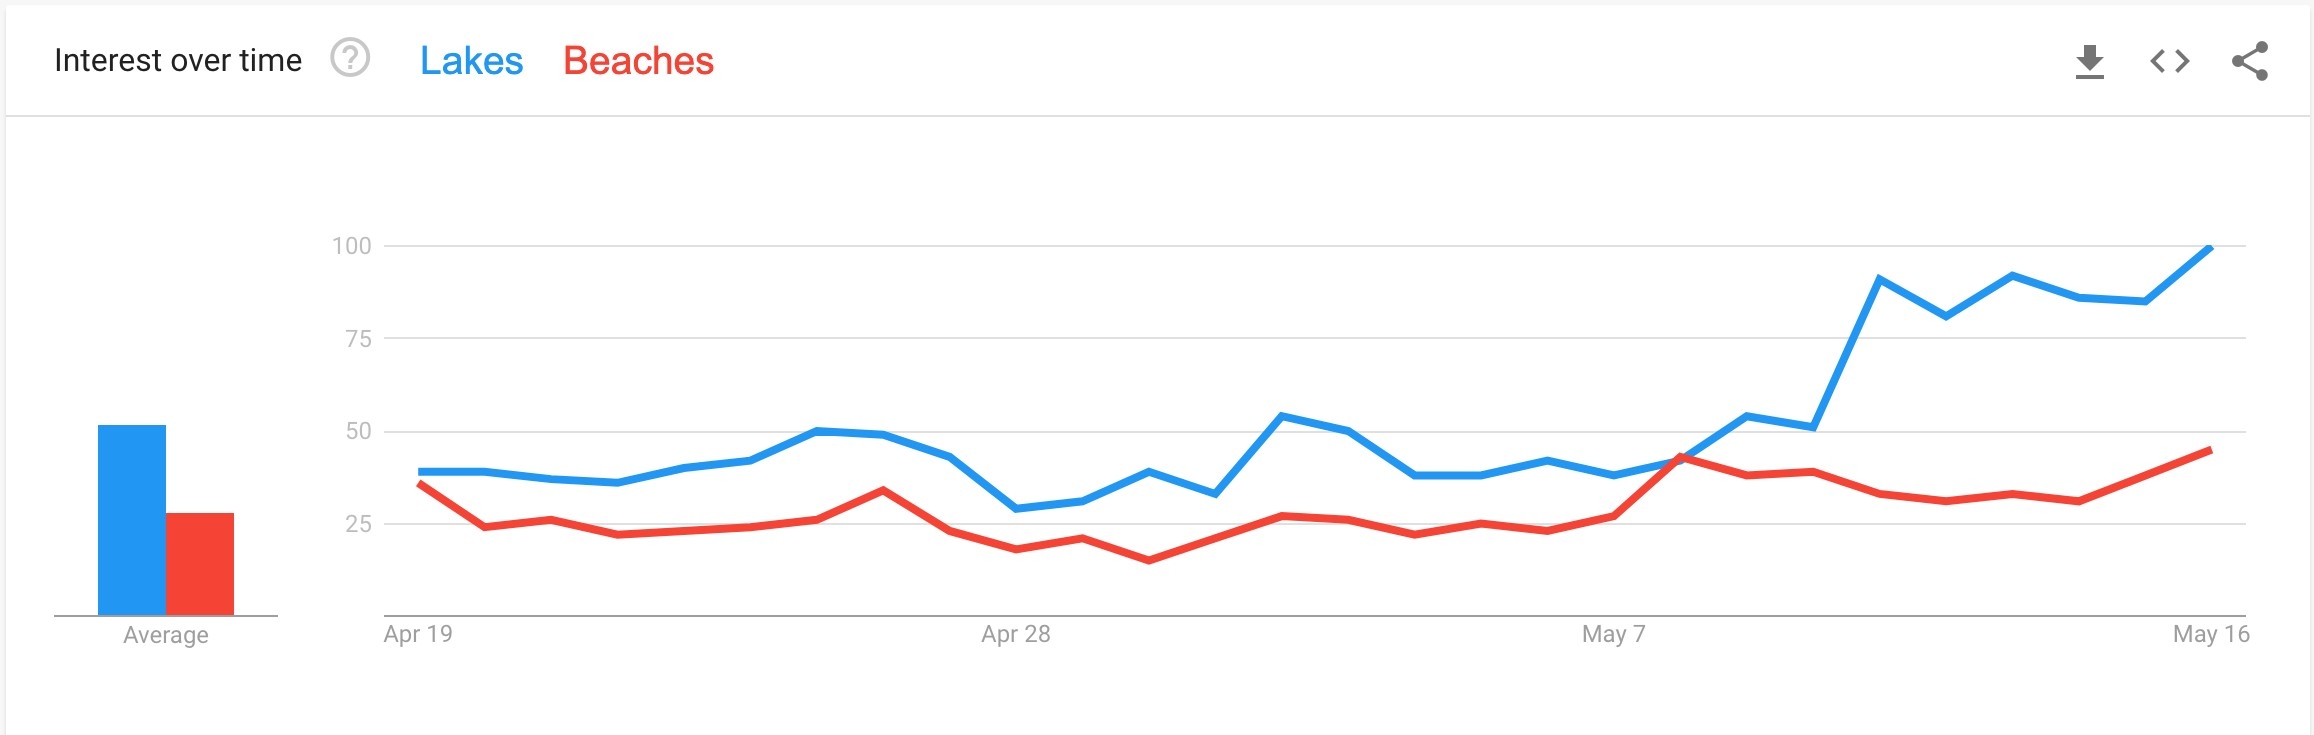 Google trends: lakes and beaches